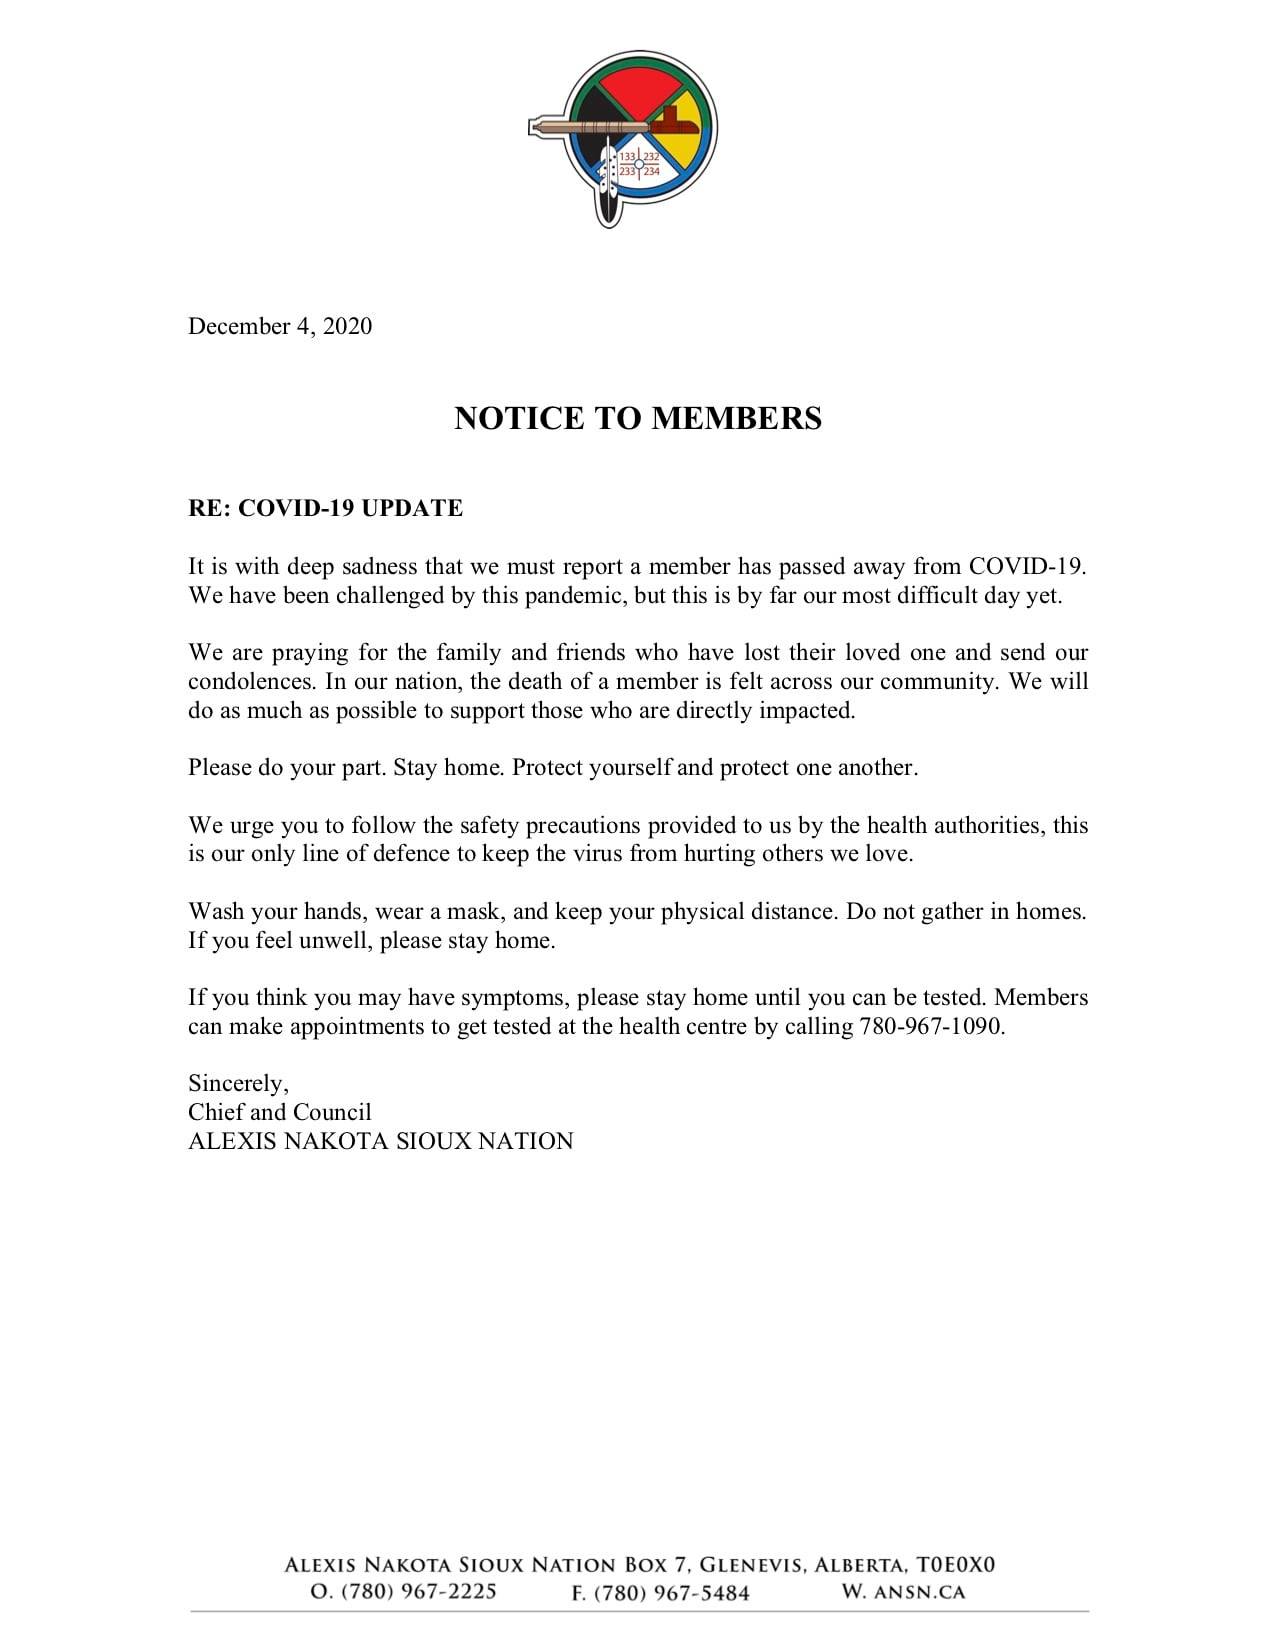 Notice: Member Lost Due to COVID-19